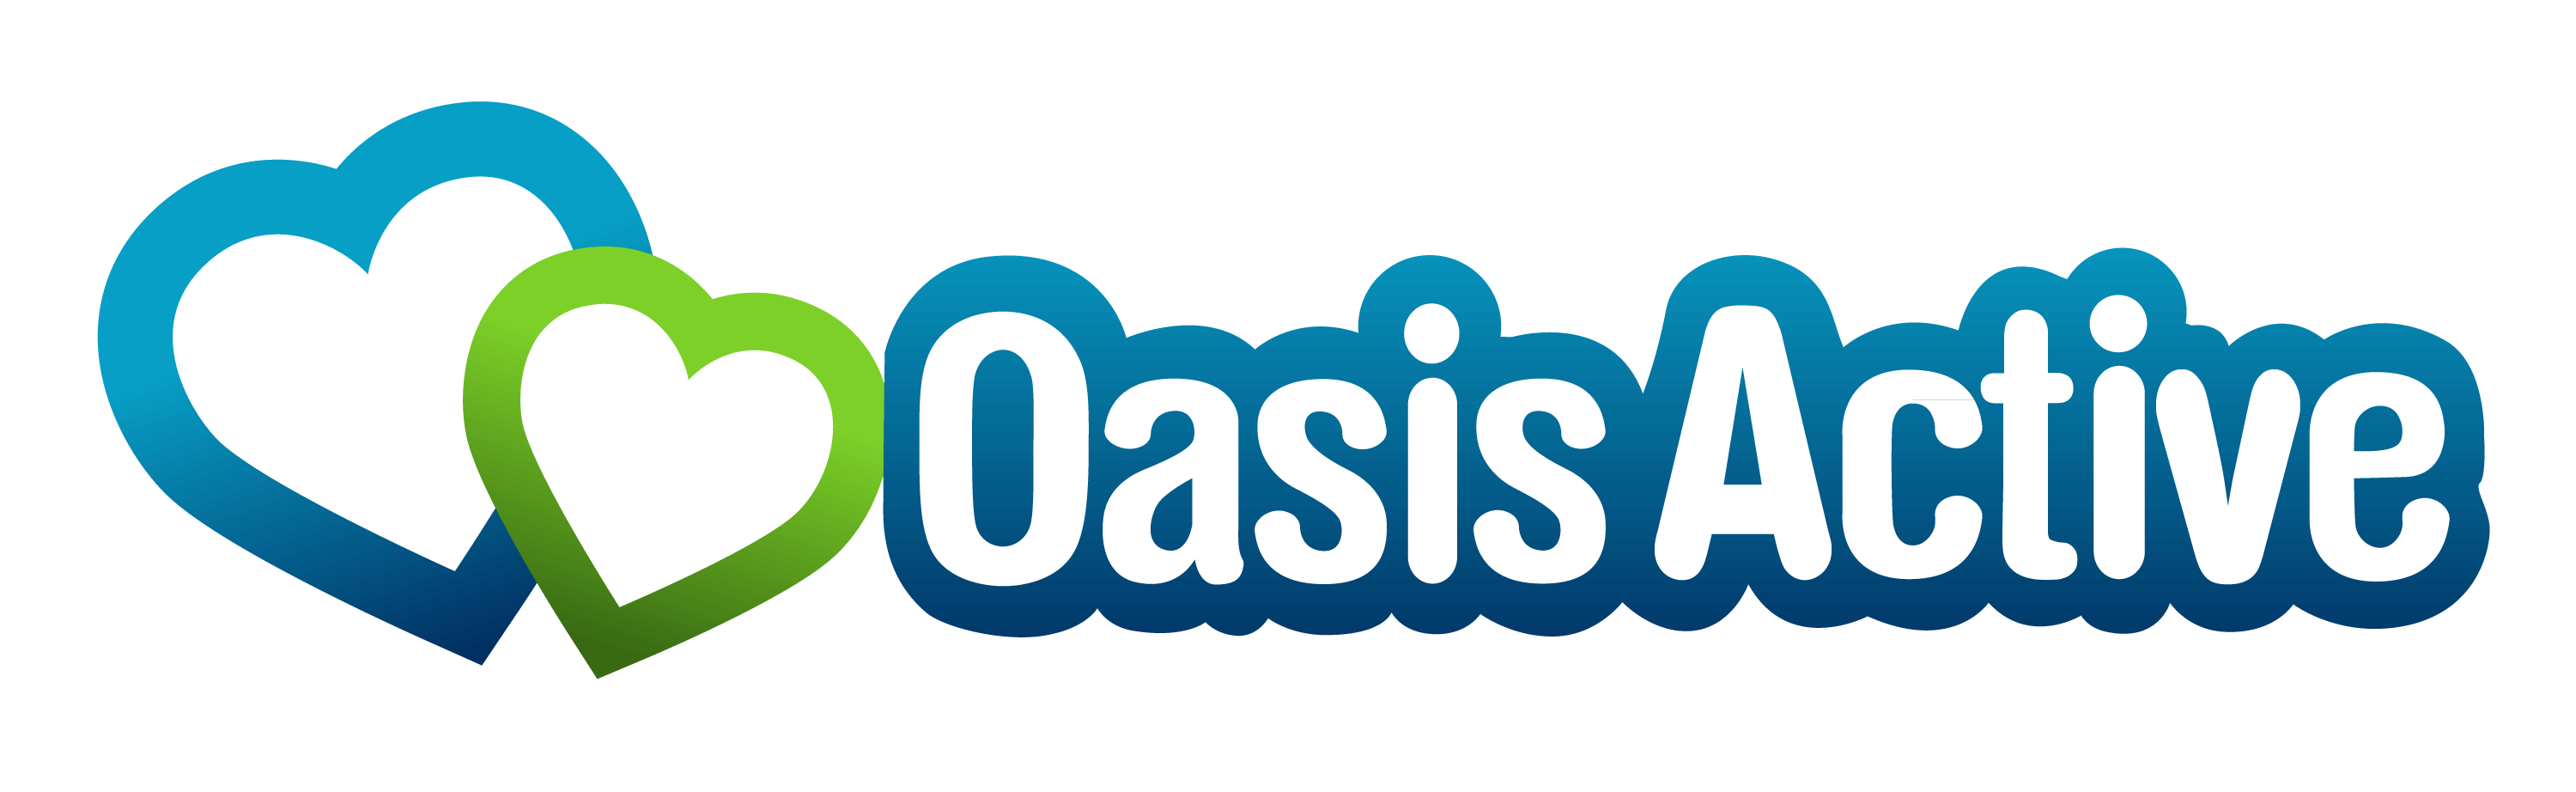 dating site oasis)